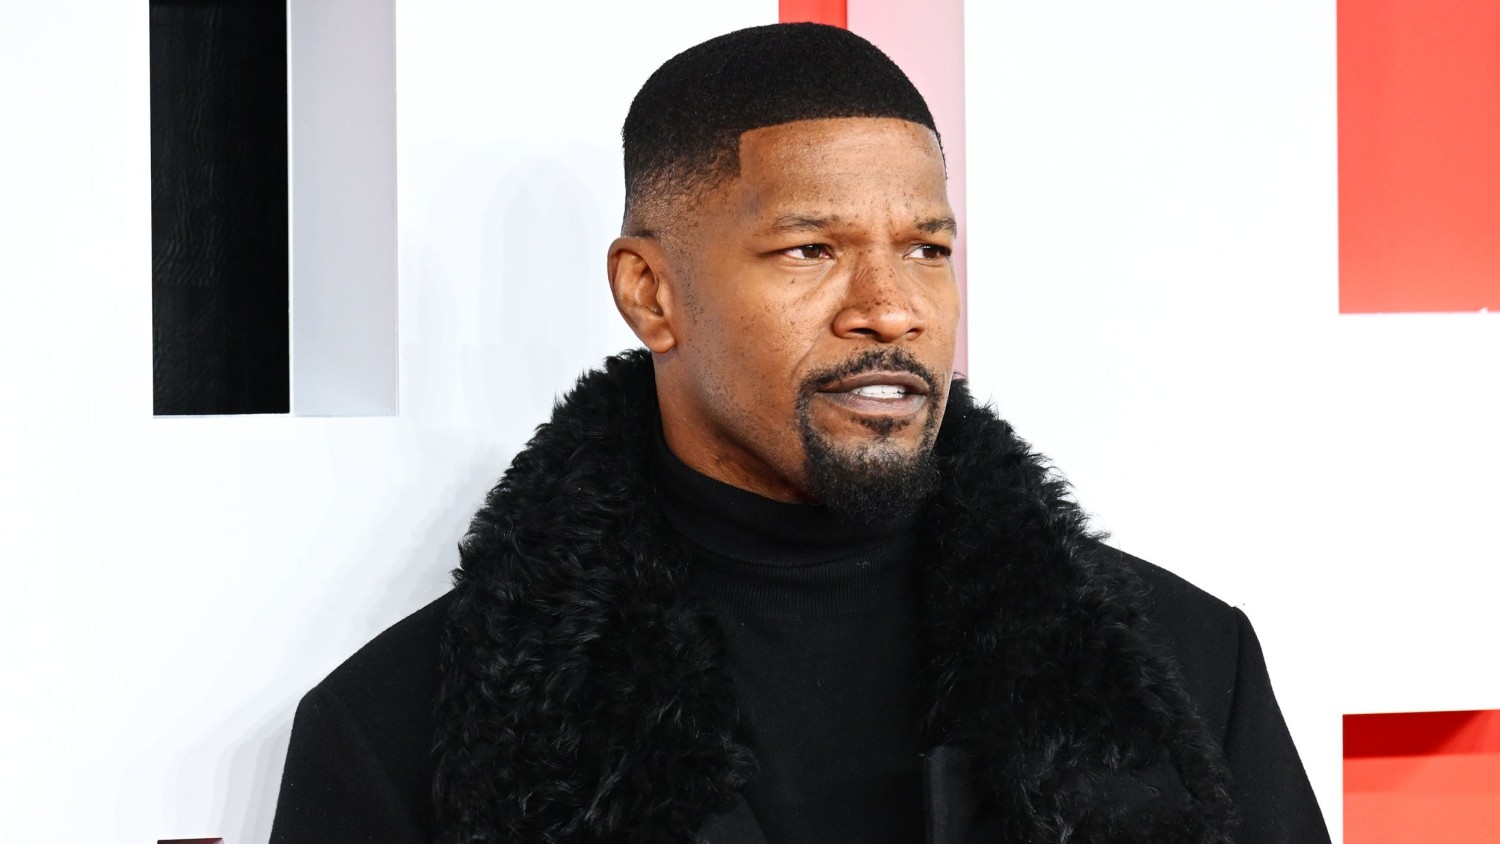 Jamie Foxx’s friends and family aren’t sharing his medical diagnosis.